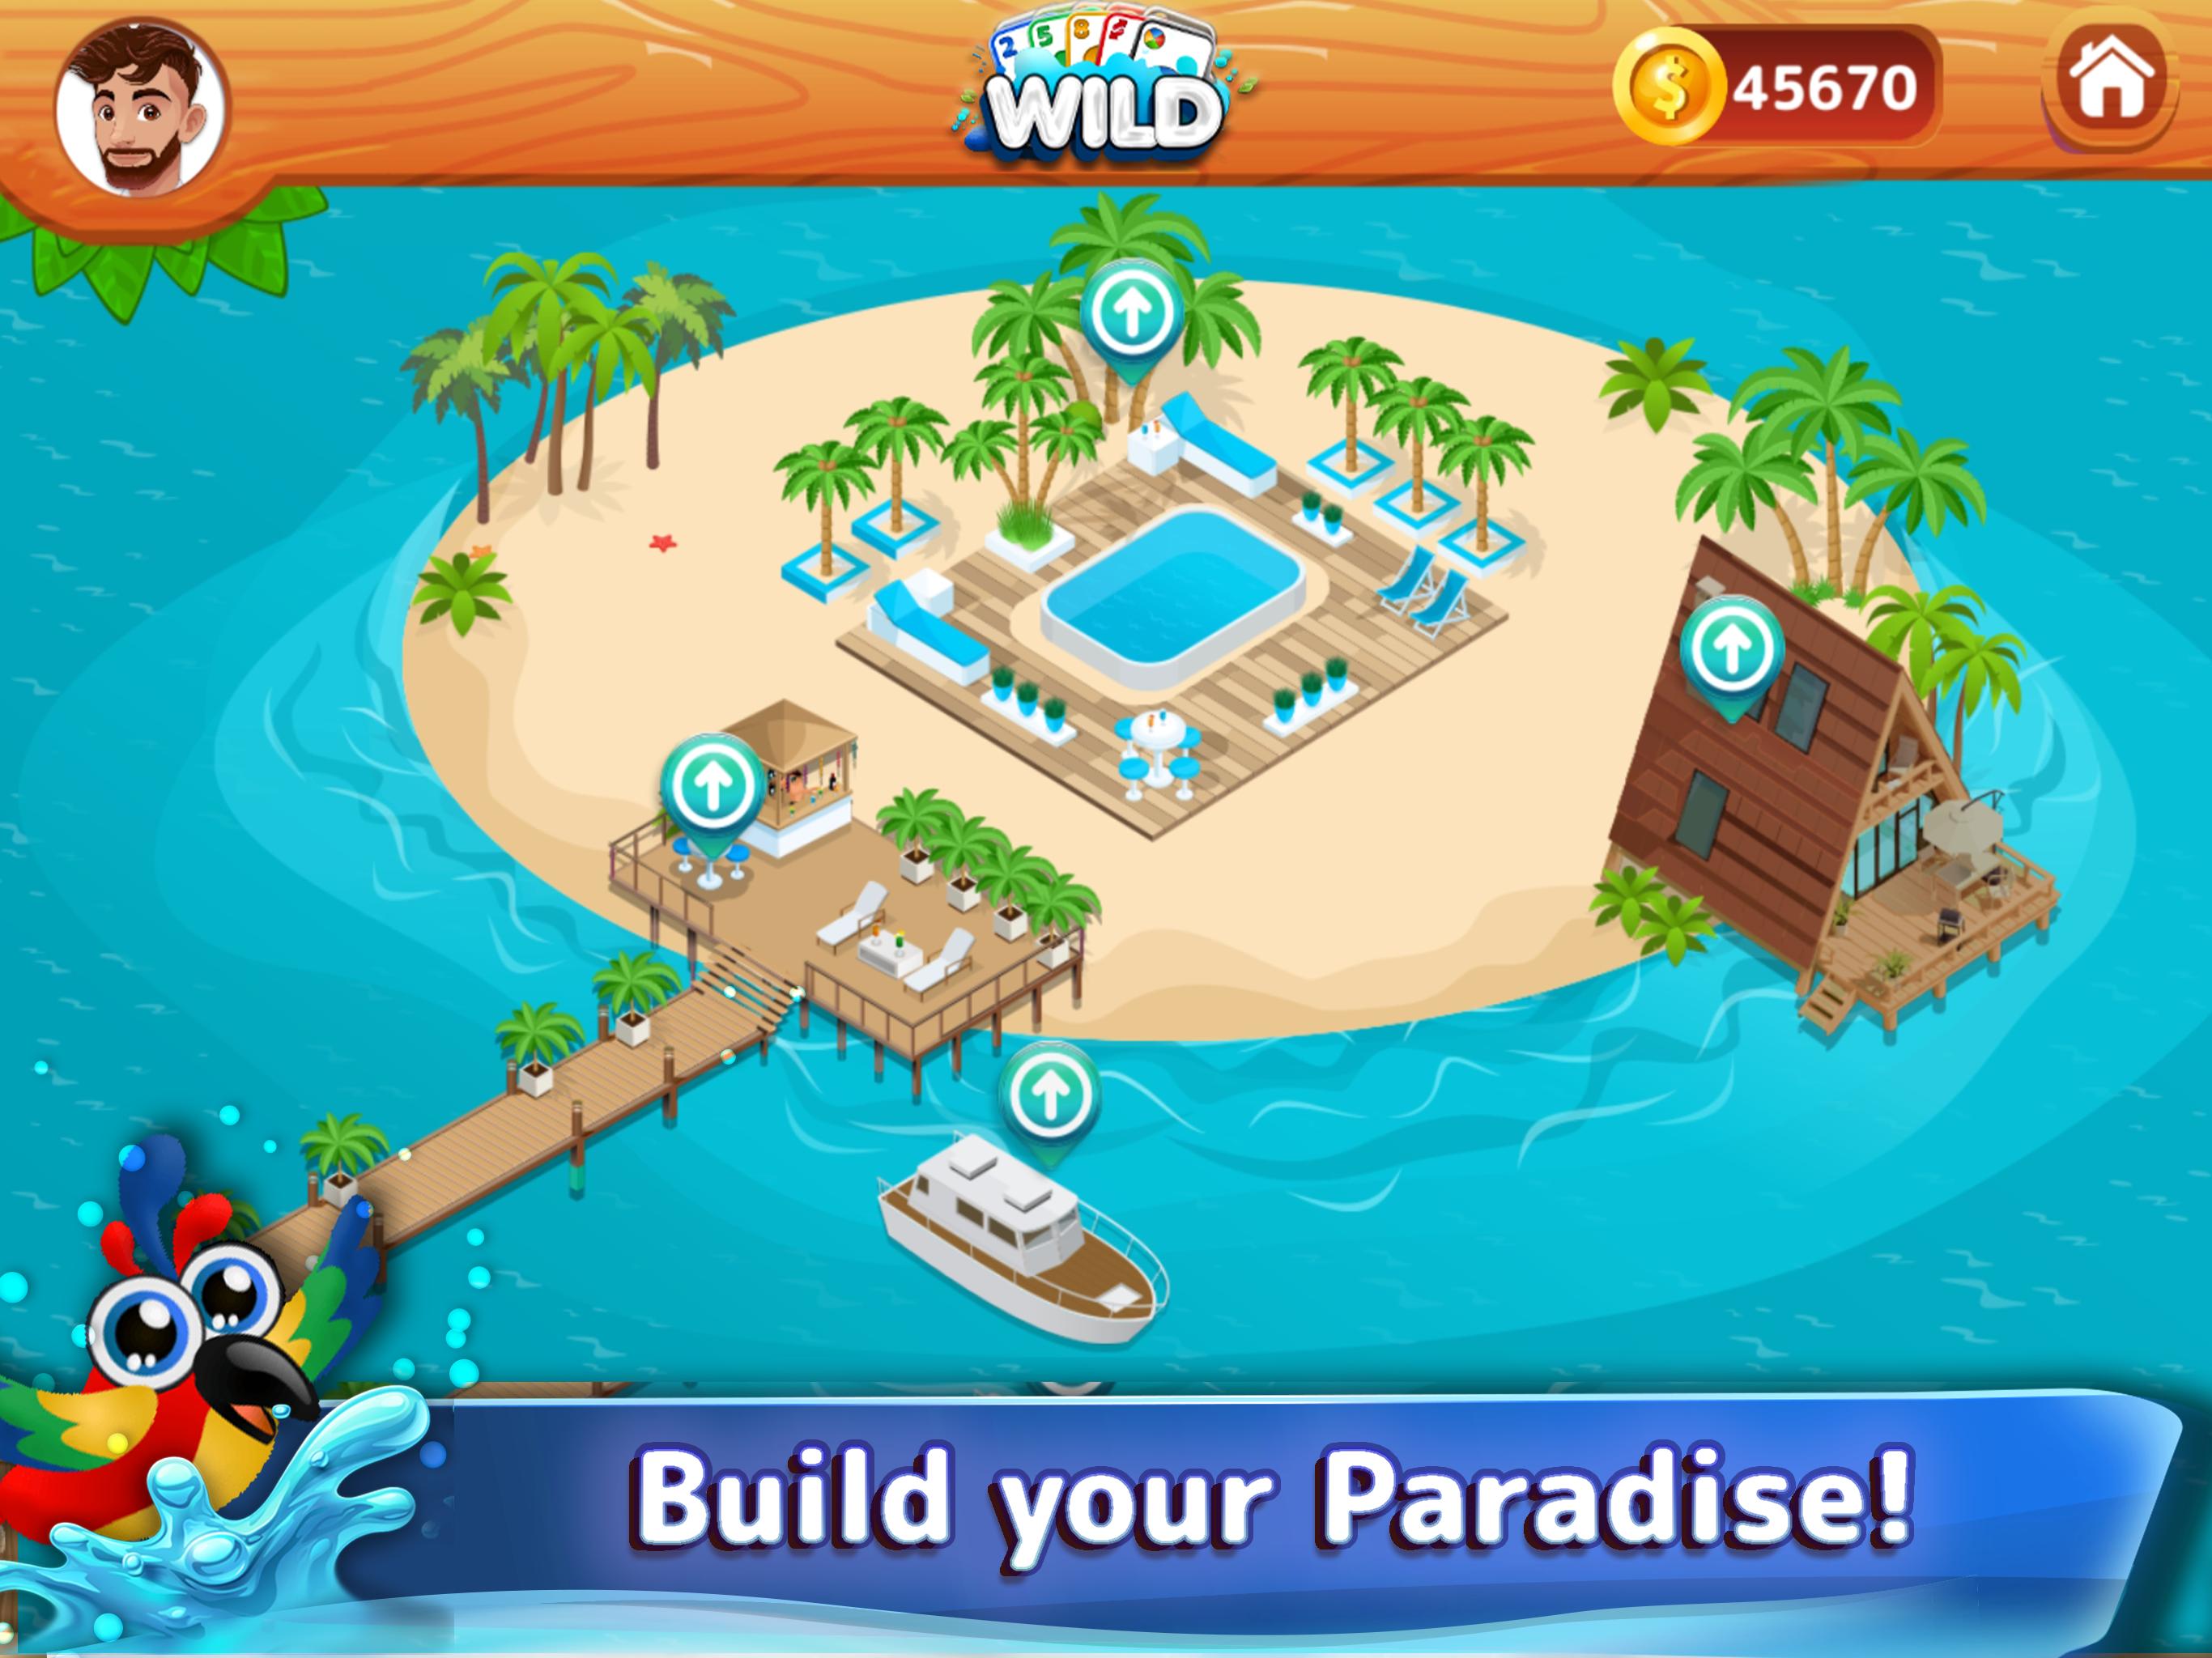 WILD CARDS Online: Multiplayer Games with Friends 3.0.22 Screenshot 22